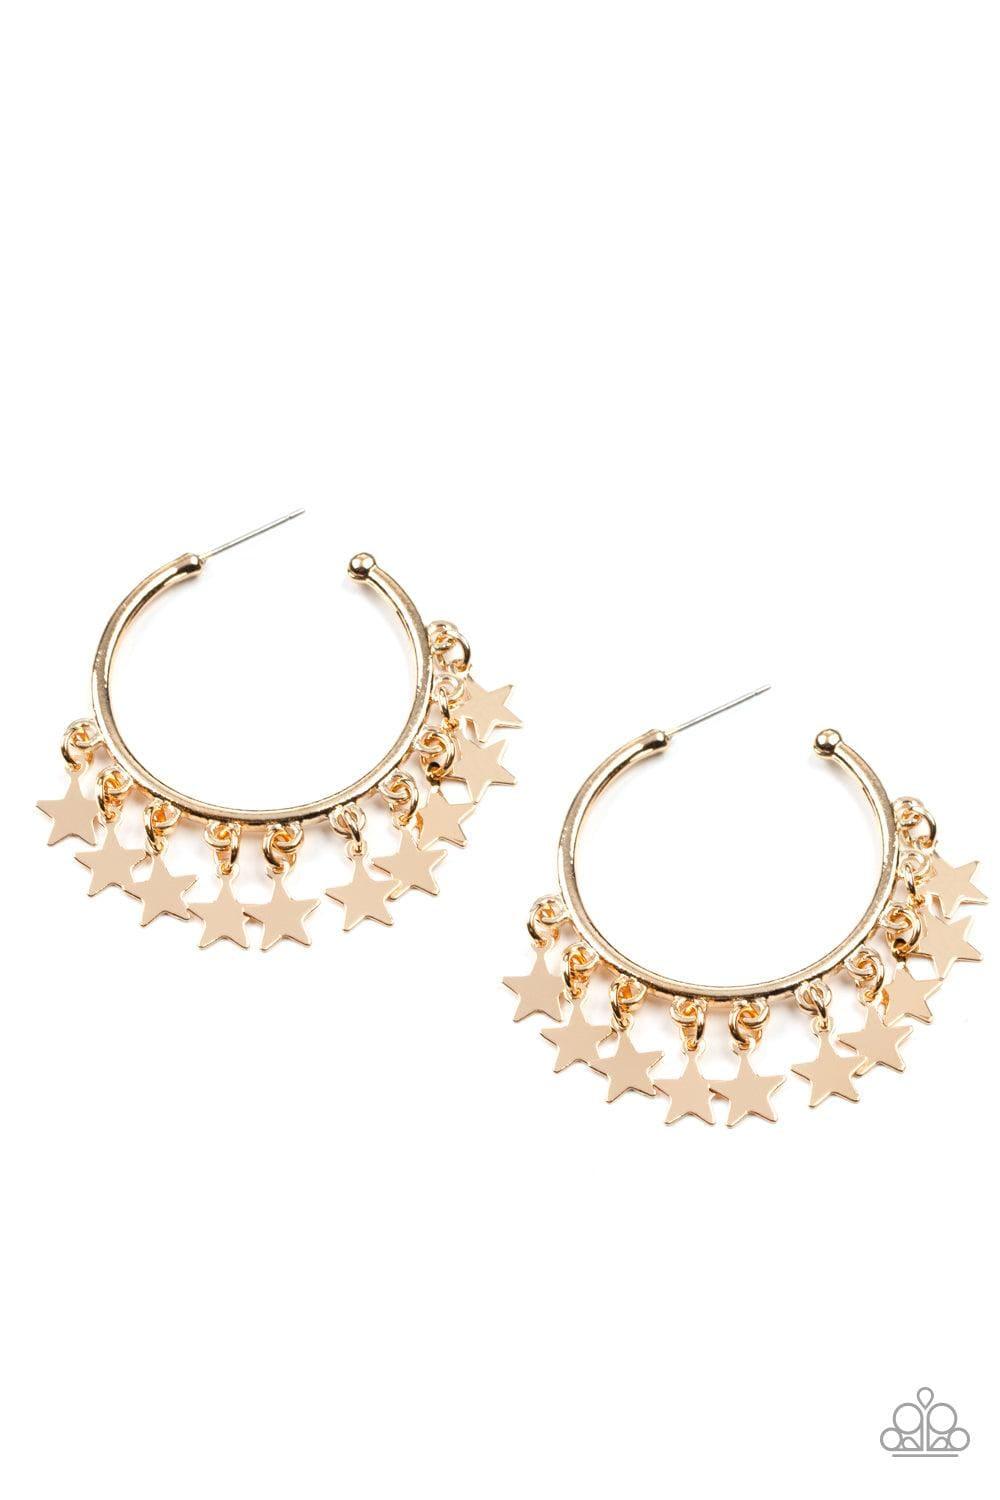 Paparazzi Accessories - Happy Independence Day - Gold Hoop Earrings - Bling by JessieK